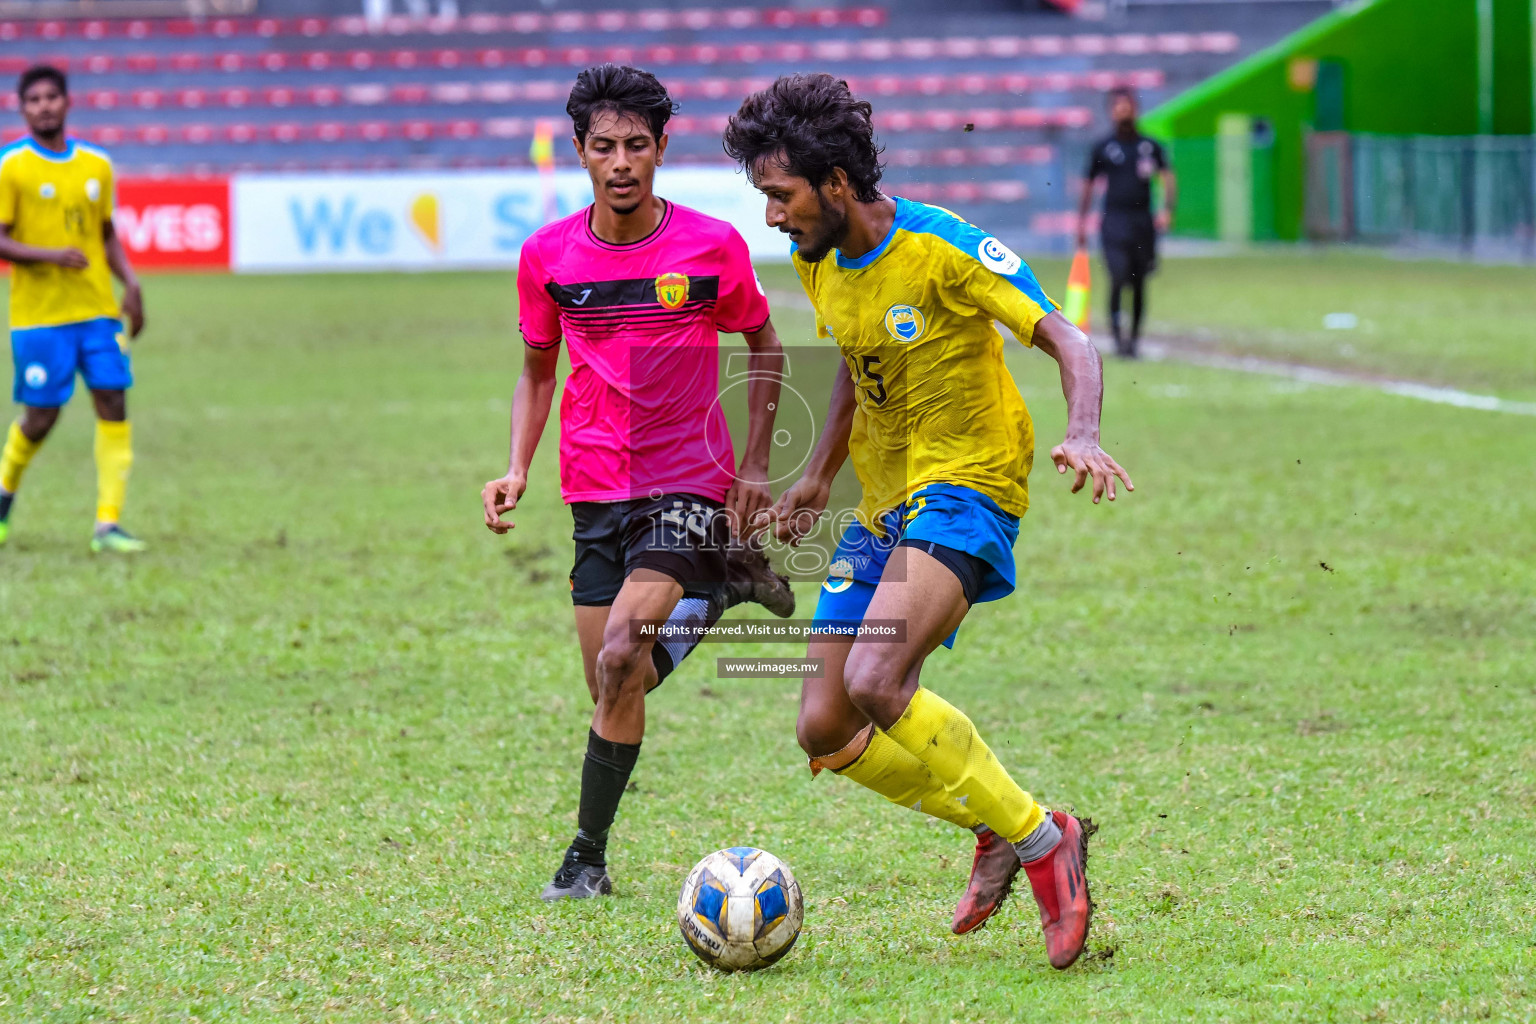 United Victory vs Club Valencia in Ooredoo Dhivehi Premier League 2021/22 on 1st Aug 2022, held in National Football Stadium, Male', Maldives Photos: Nausham Waheed / Images